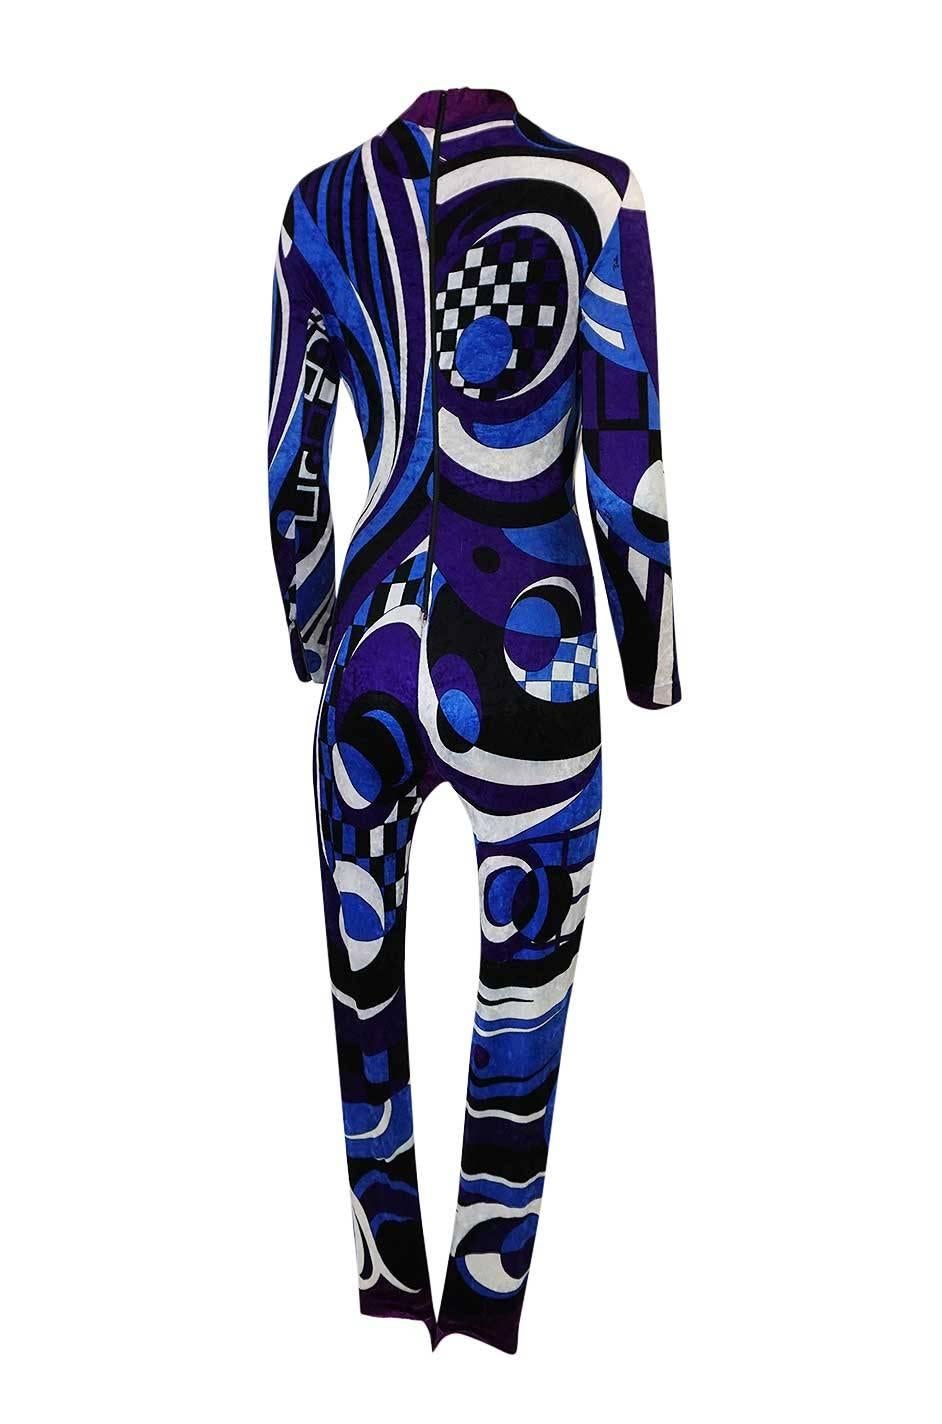 Some pieces still have the ability to make me catch my breathe when I first see them and this brilliant Pucci jumpsuit is one that did. It is an absolutely gorgeous Pucci piece with a bold and classic Pucci color palette in blues, white and black